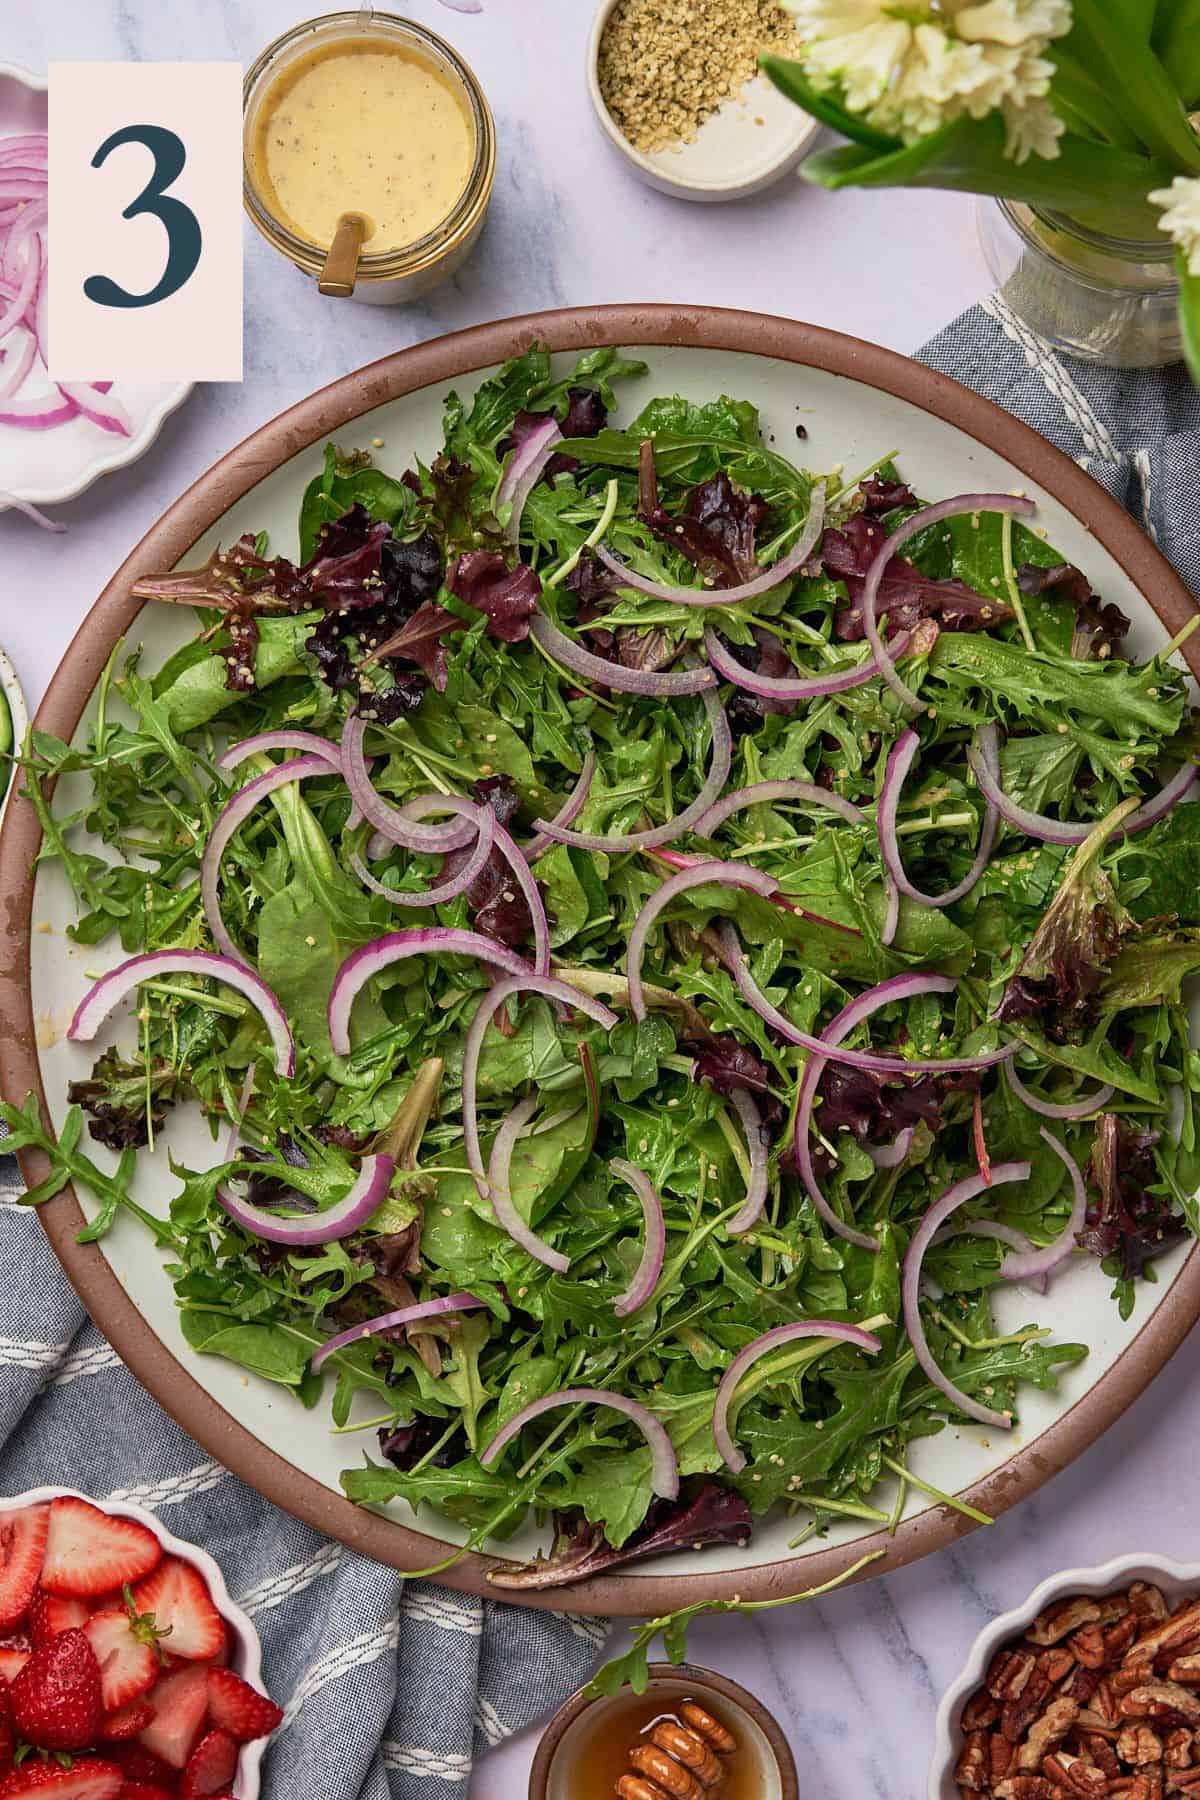 Red onions topping plate of arugula.